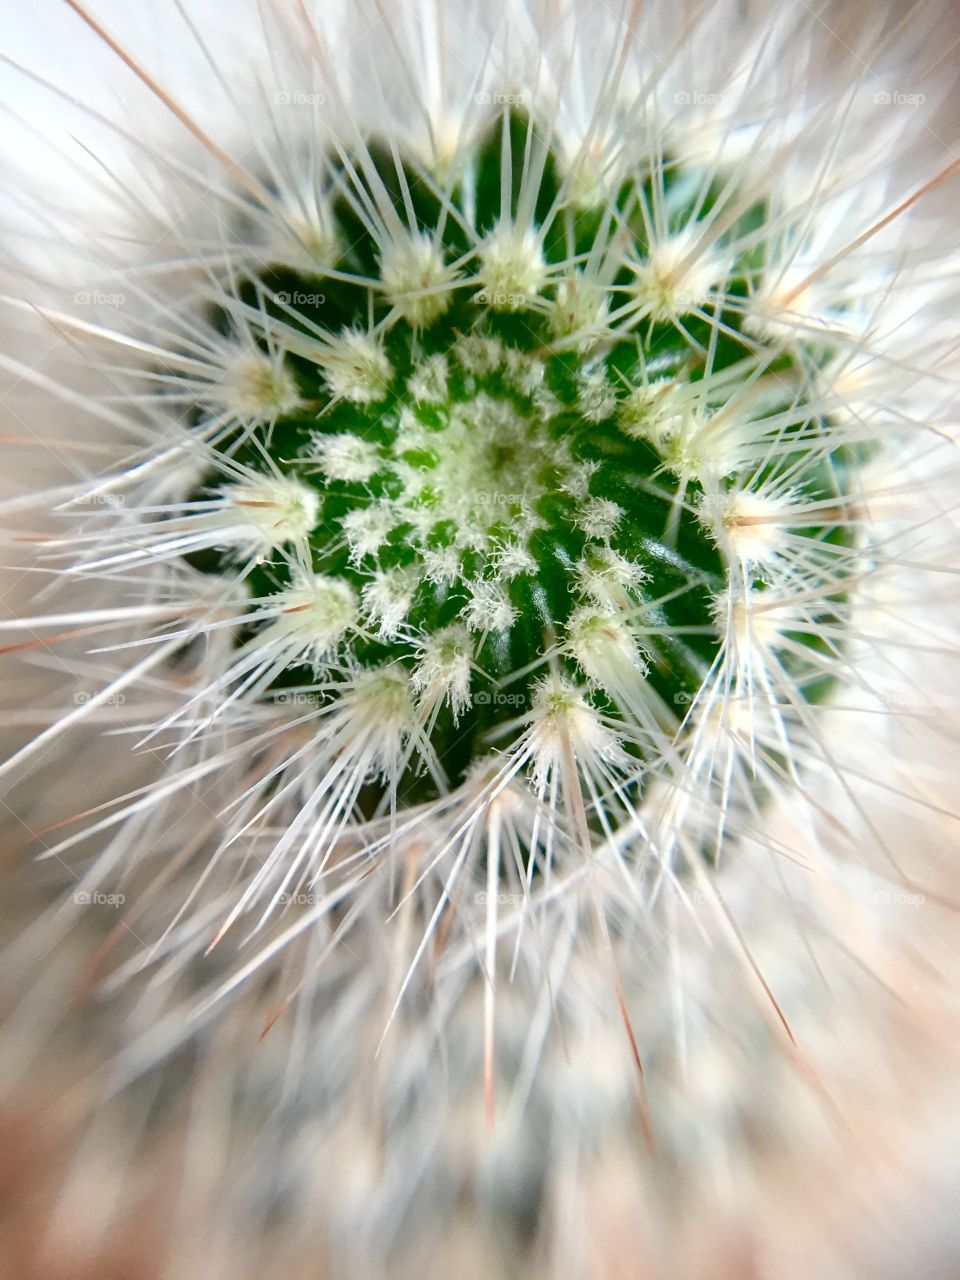 Macro of a cactus from the top